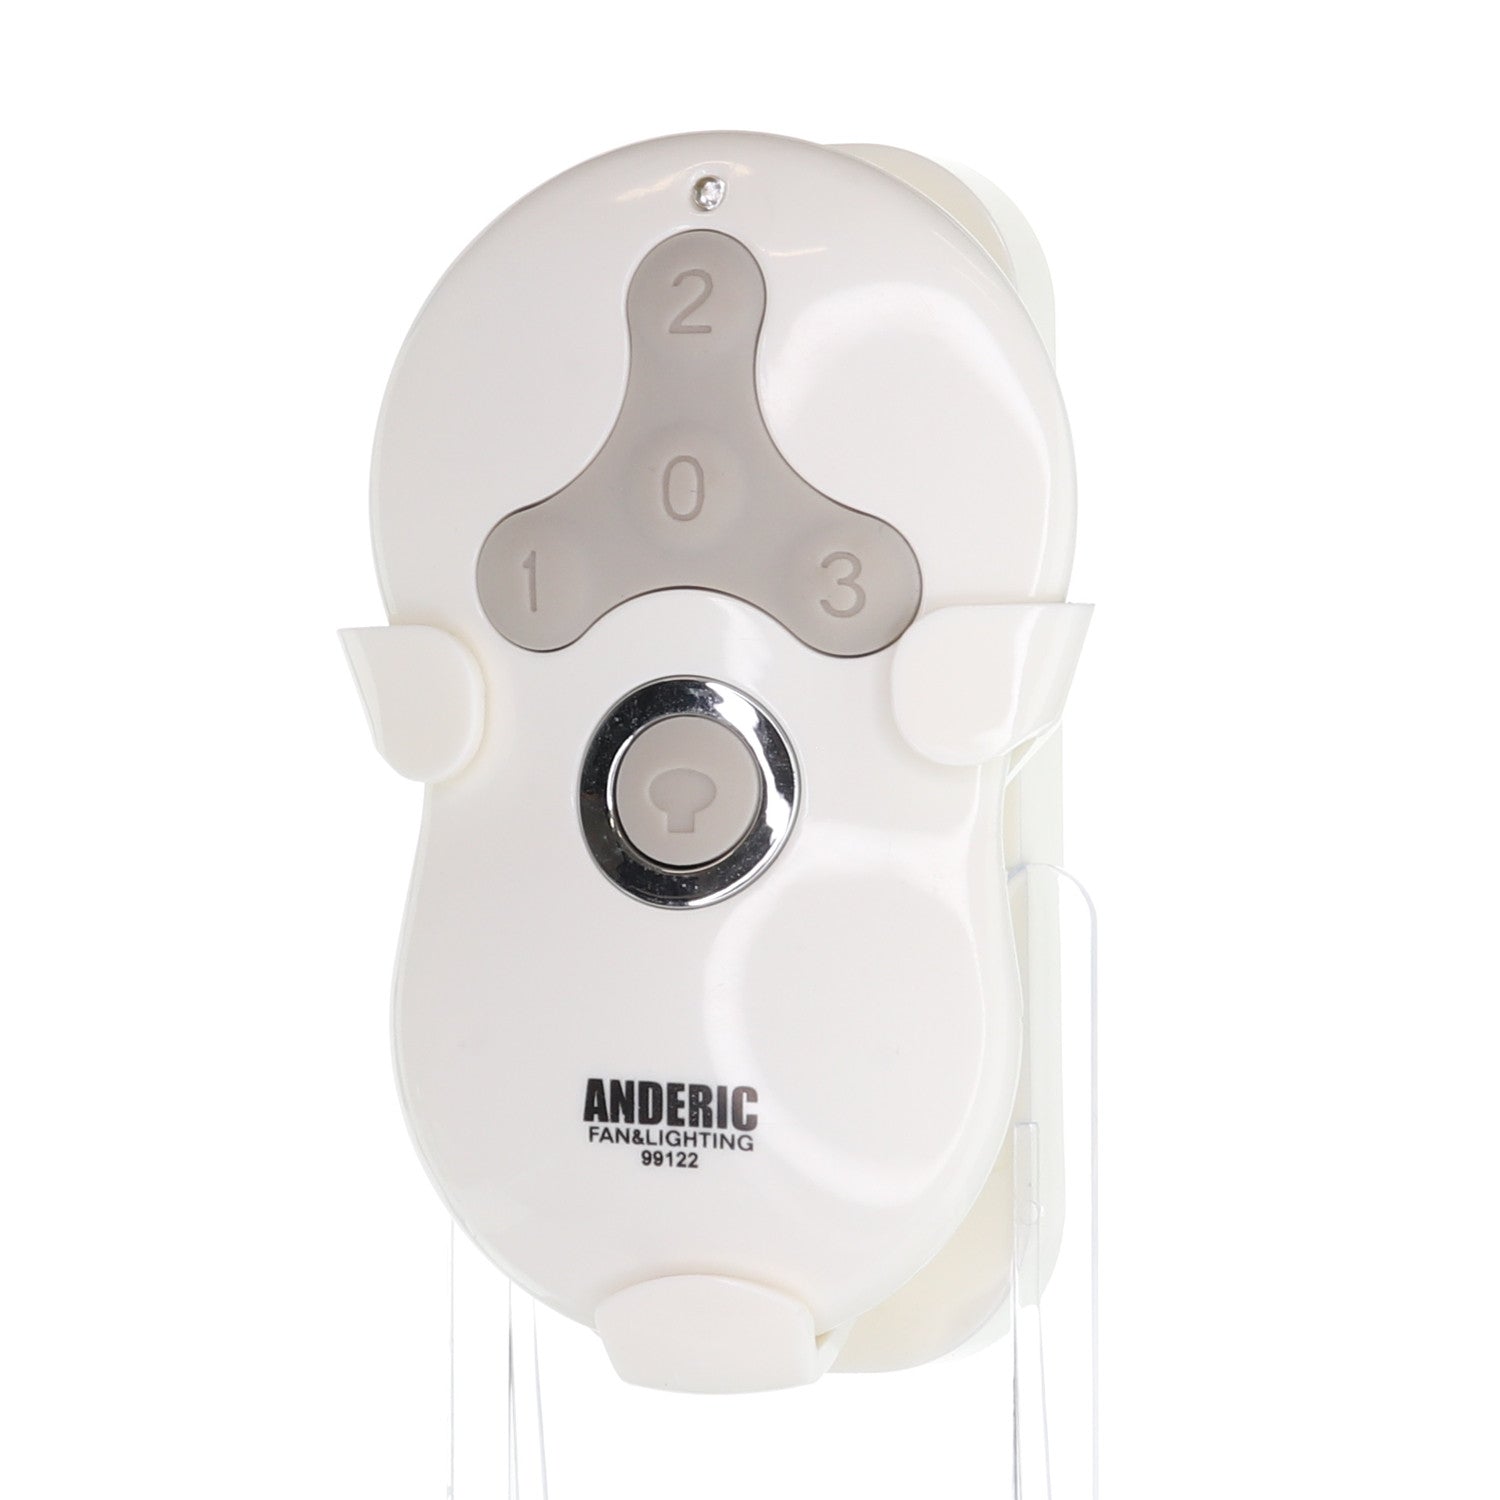 99122 for Hunter® IN2TX41 Ceiling Fan Remote Control